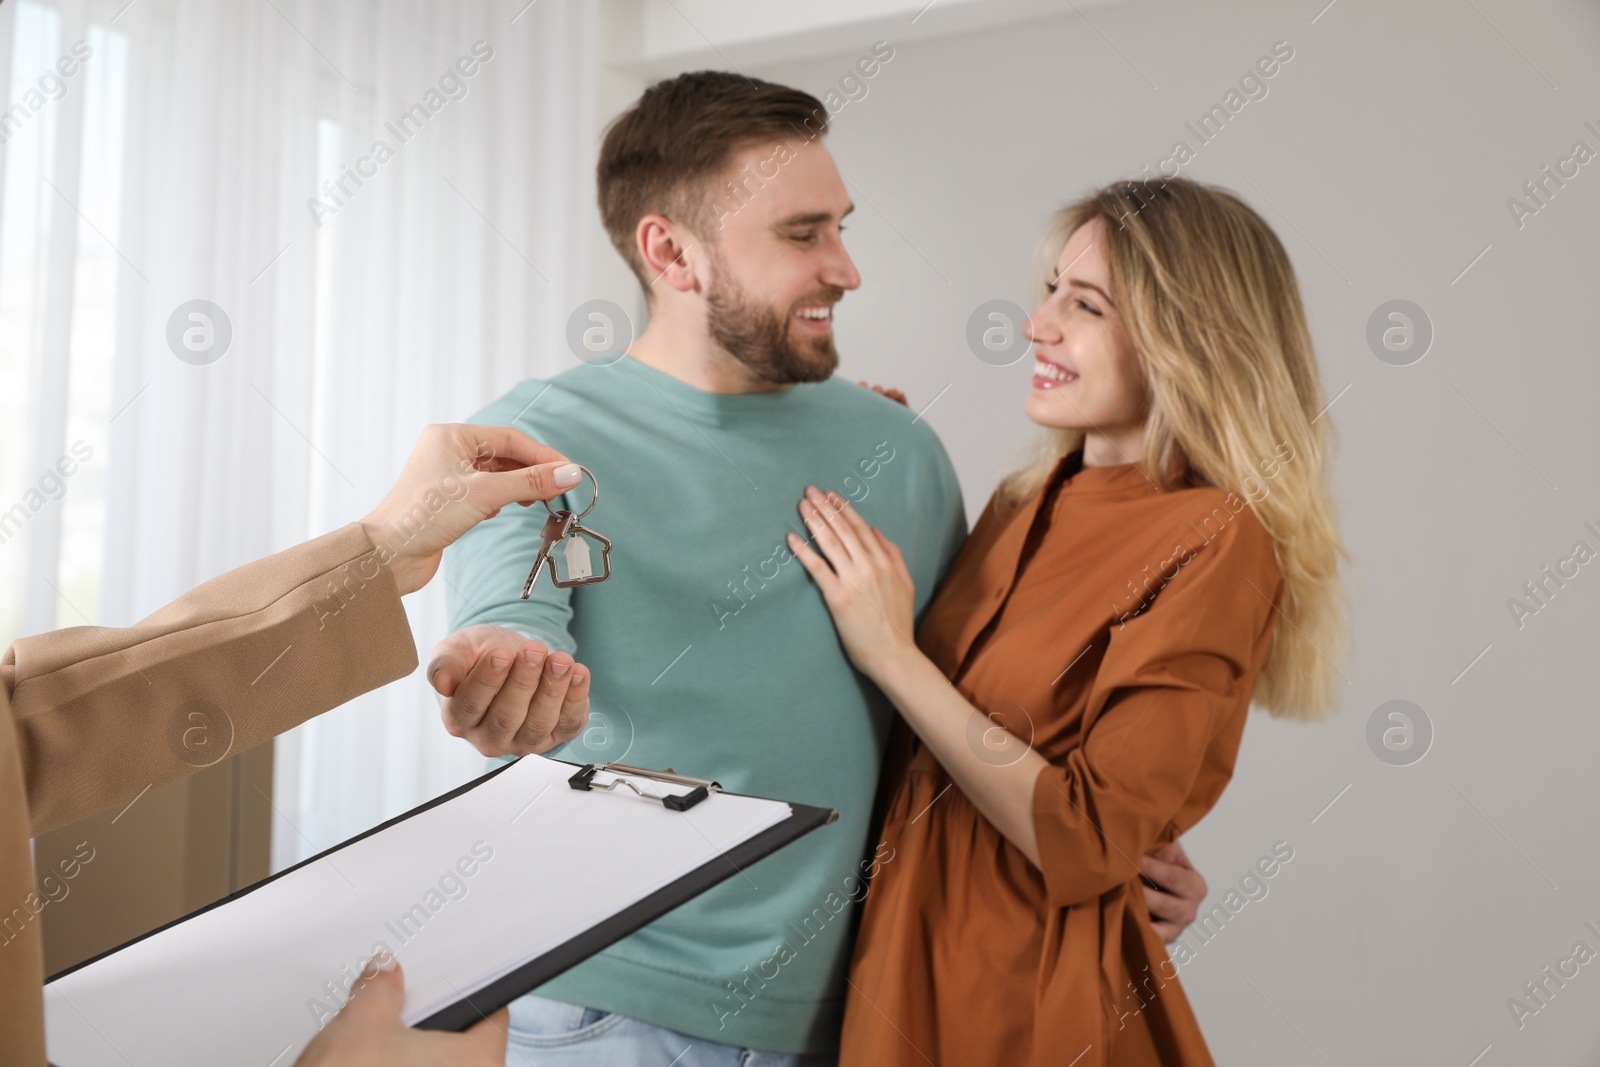 Photo of Real estate agent giving key to happy young couple in new house, focus on hands